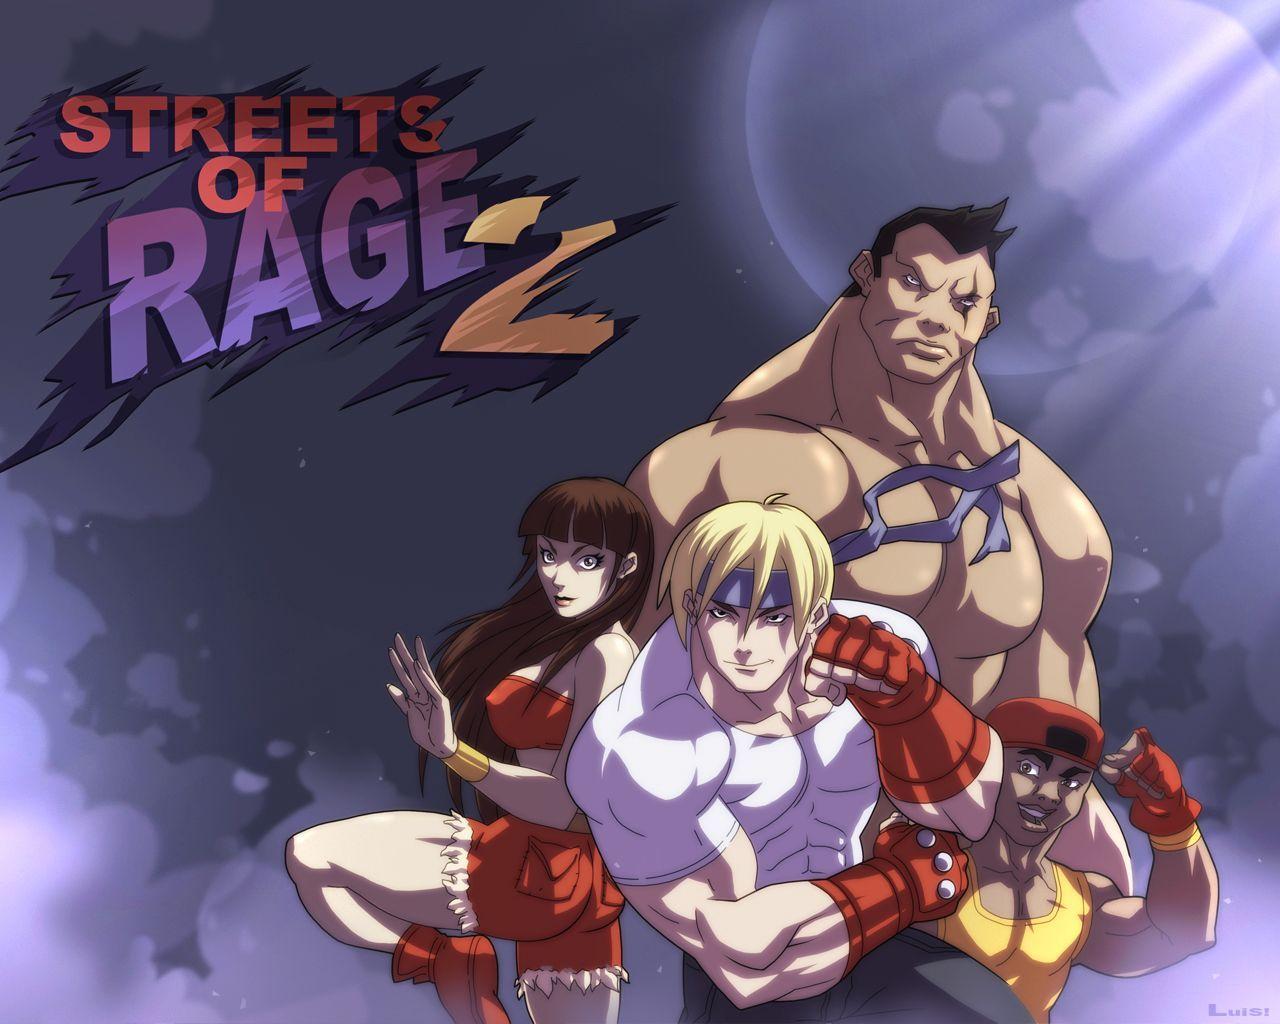 streets of rage 2 wallpaper. Dinosaurs. Rage and Street